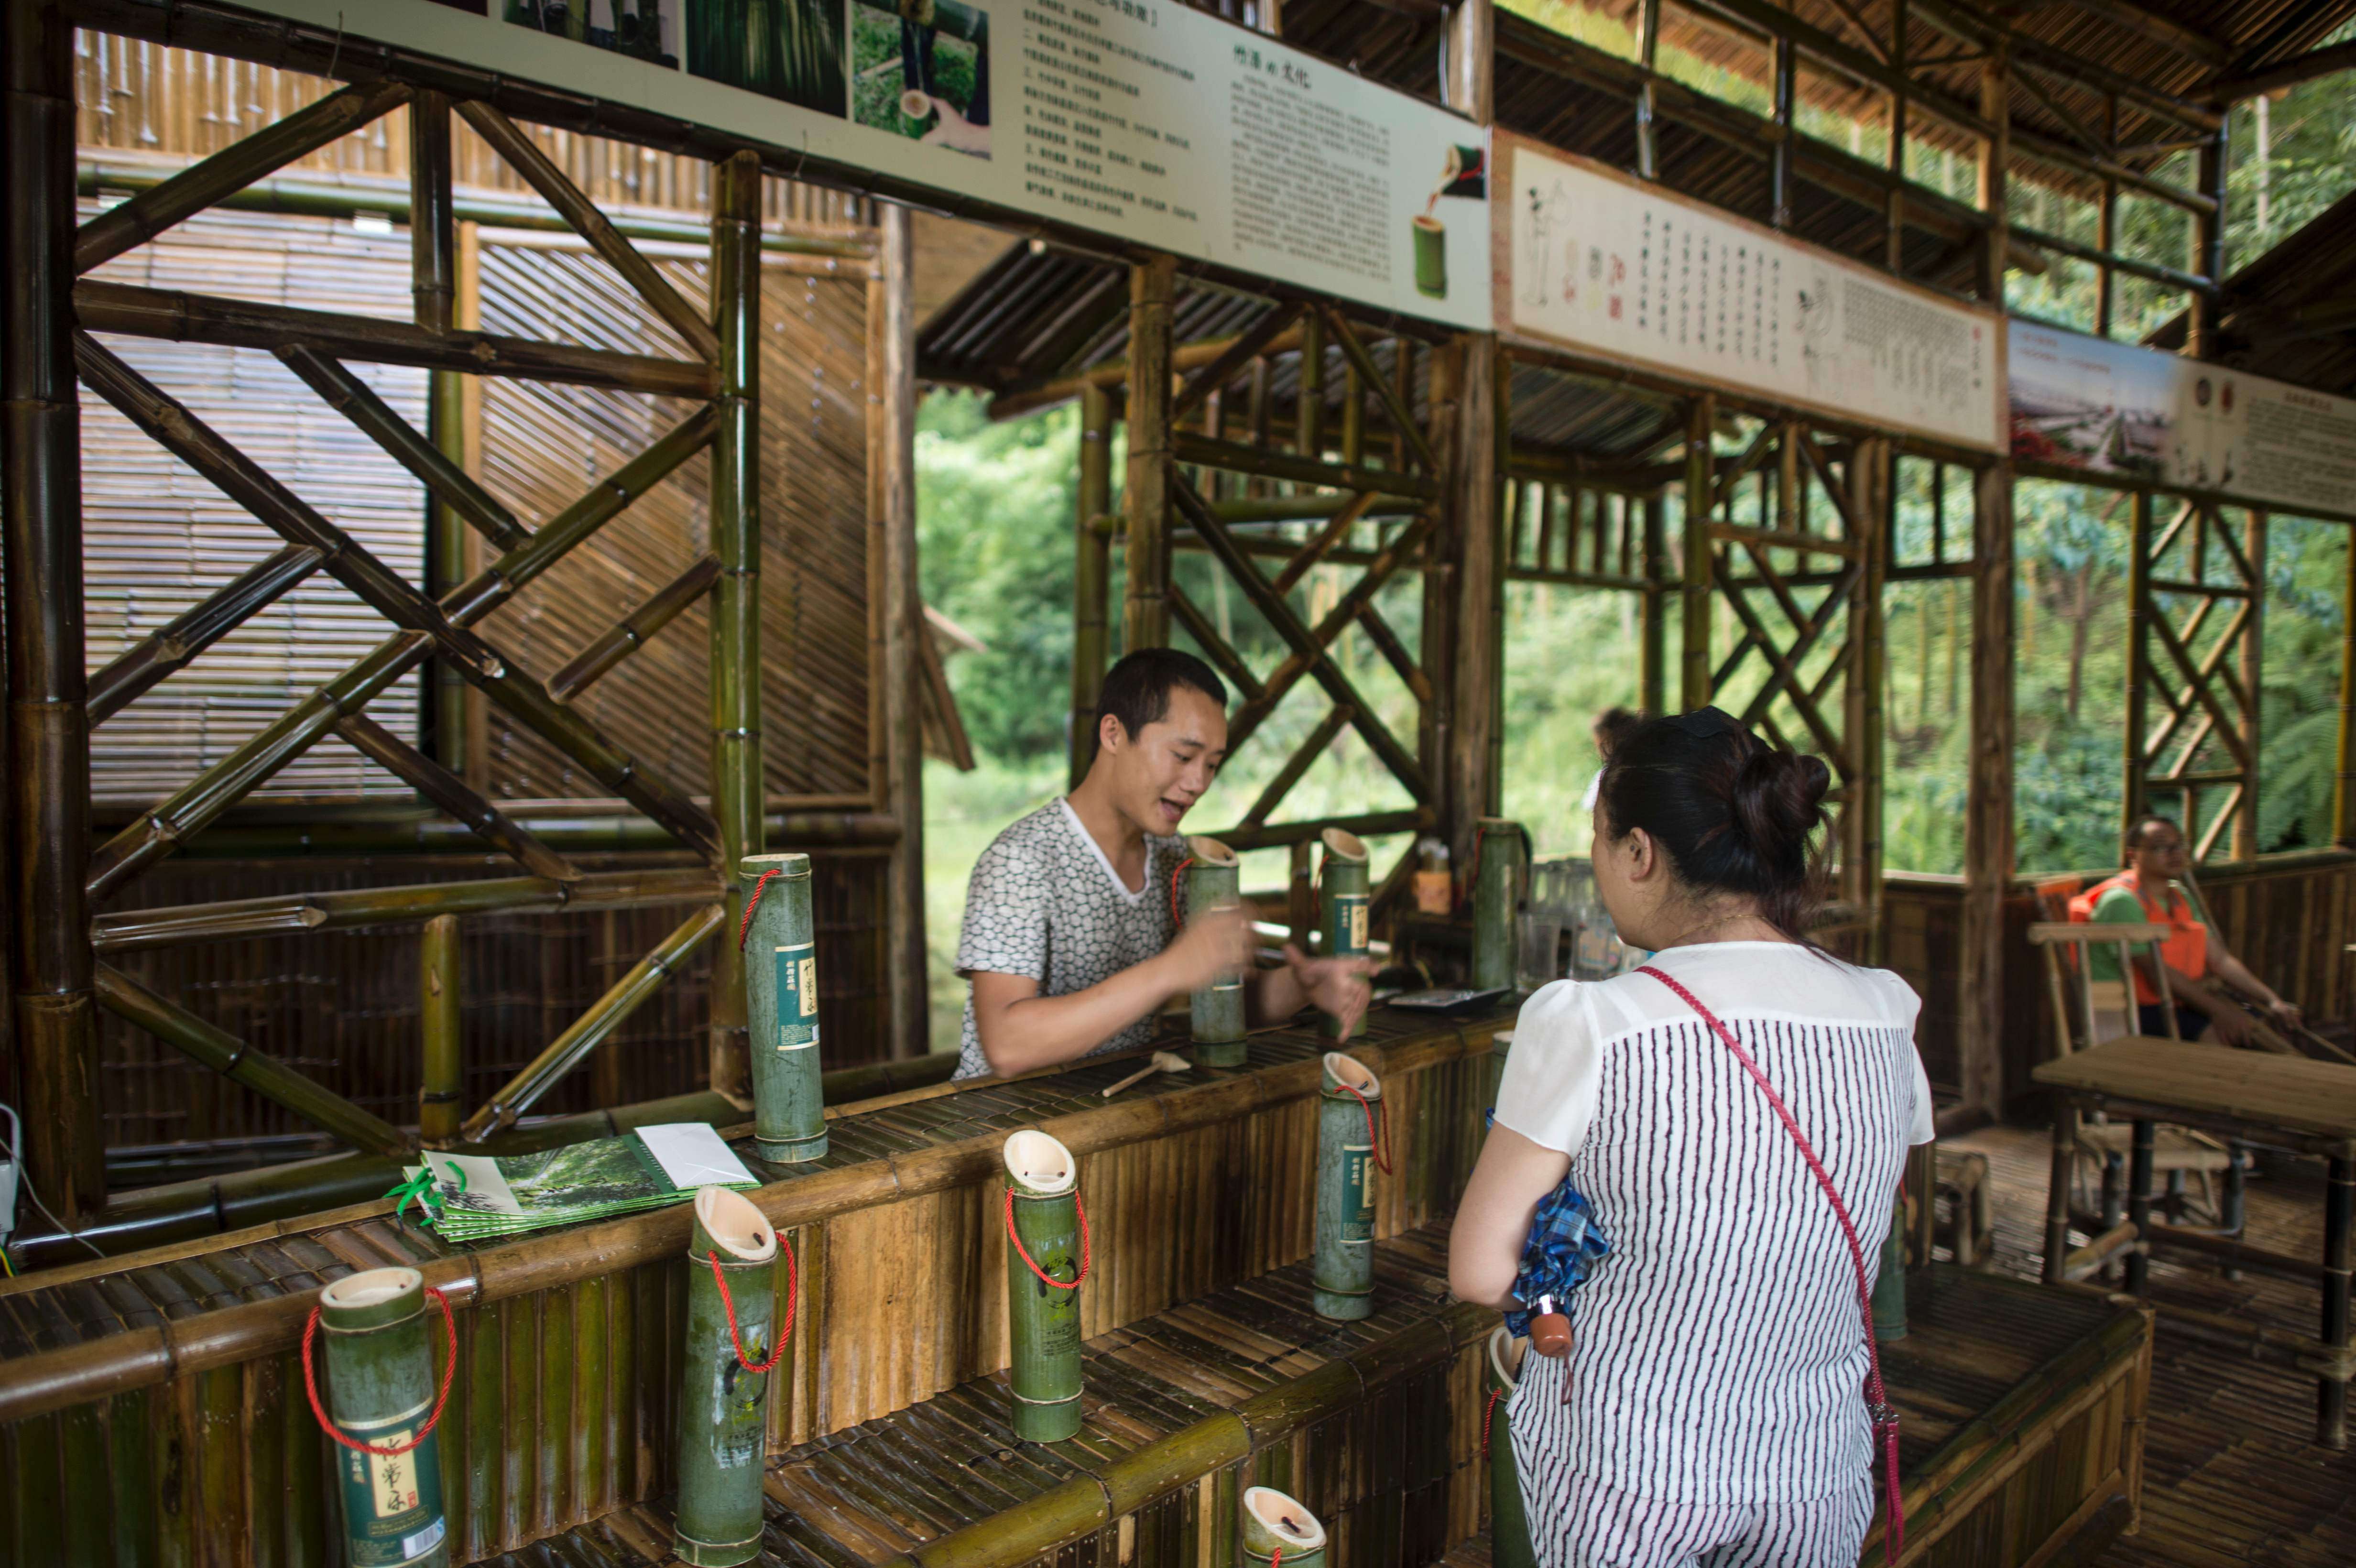 Chinese villagers leave liquor to purify inside bamboo to make alcohol